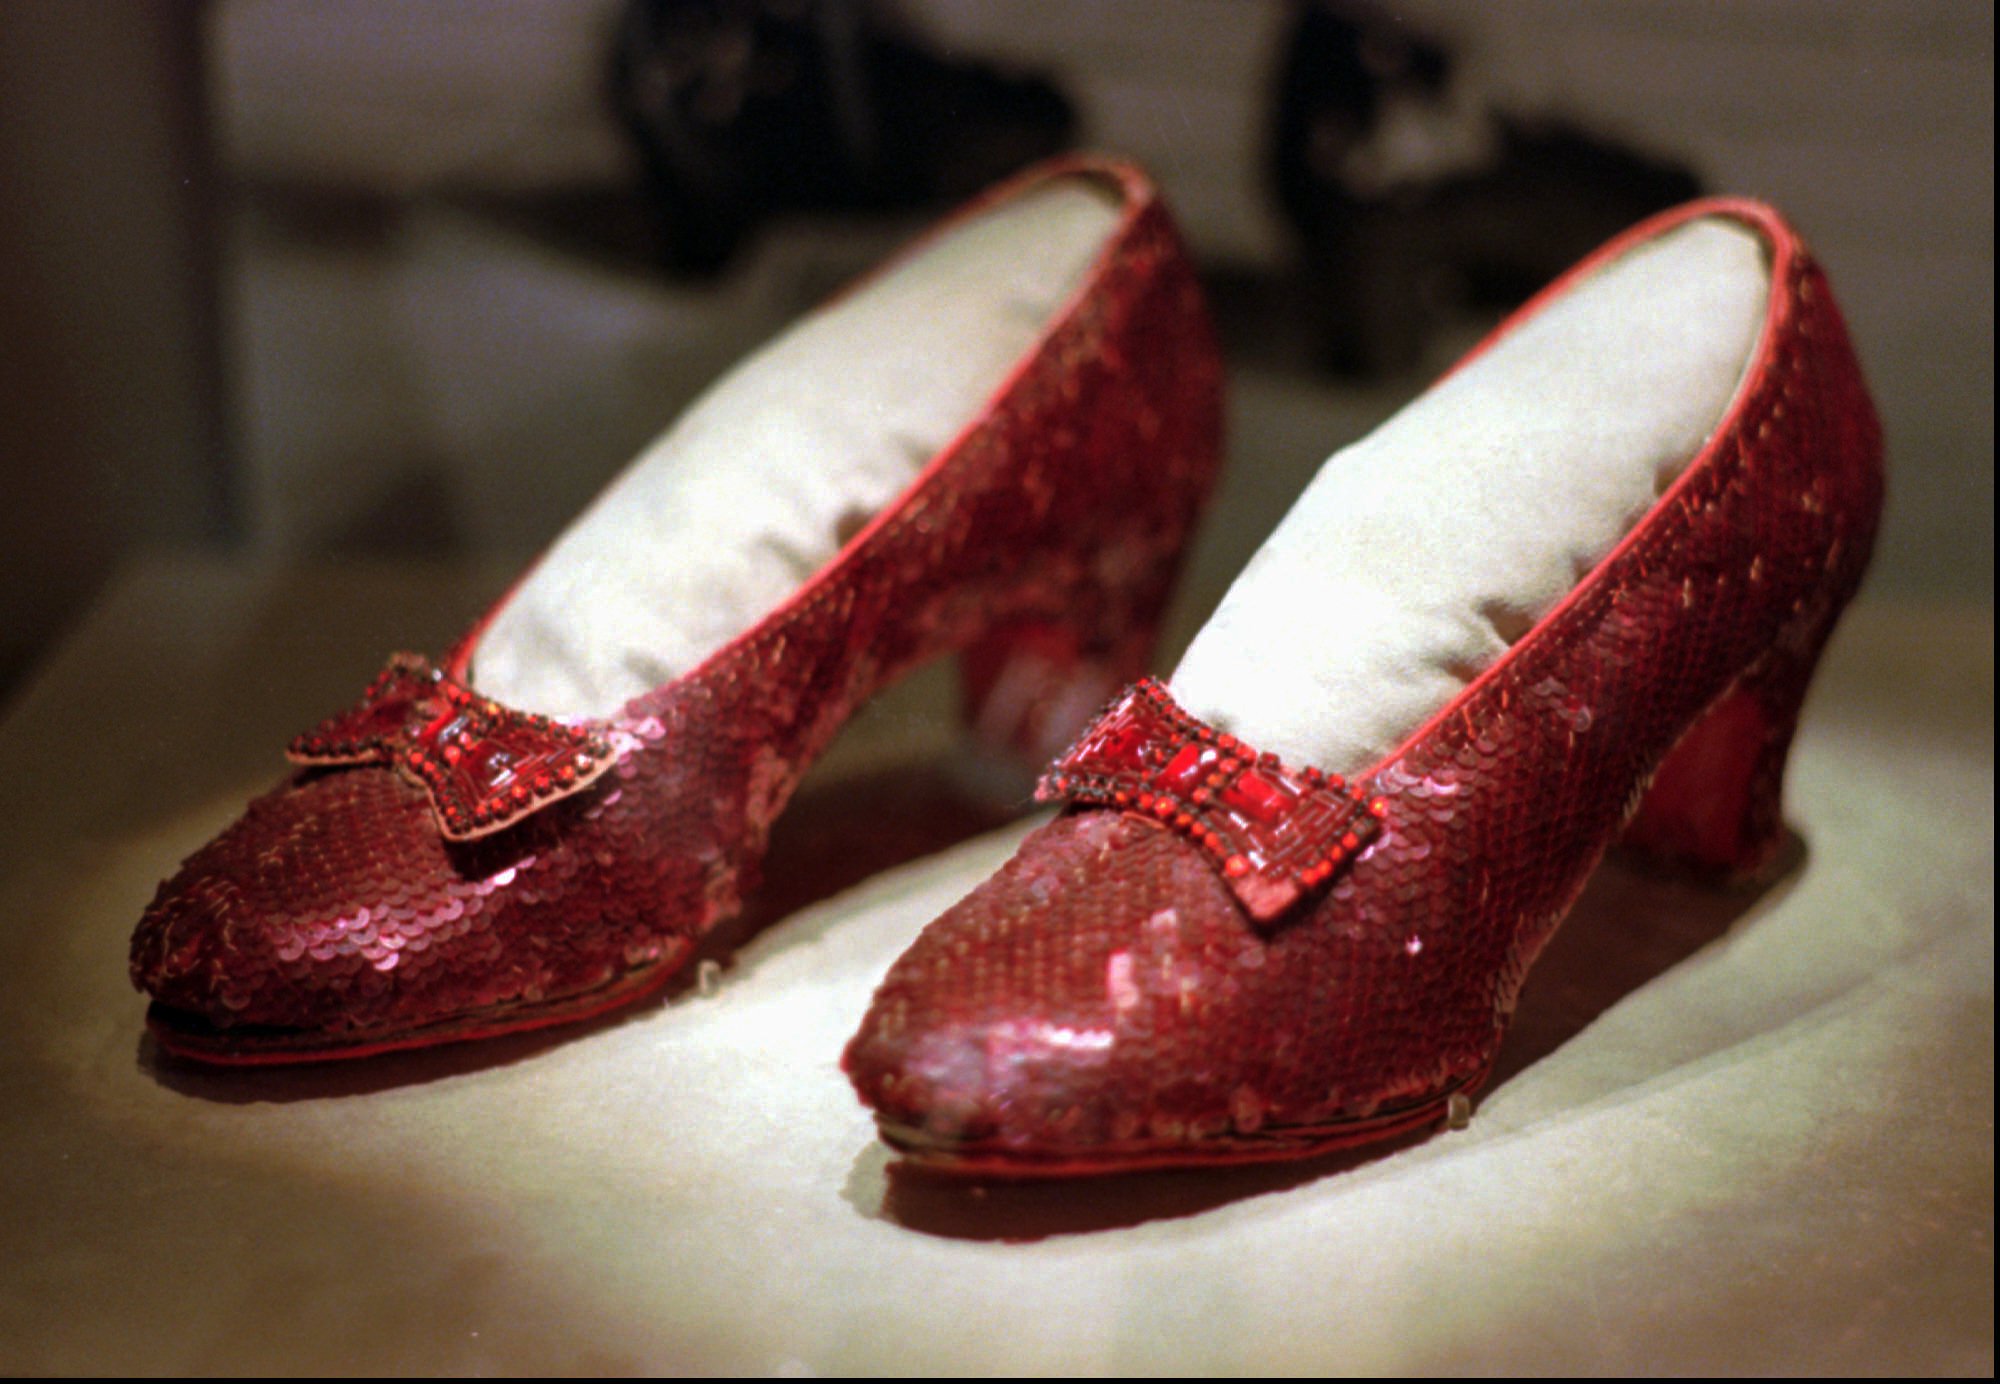 Smithsonian to lend Dorothy's ruby slippers to UK